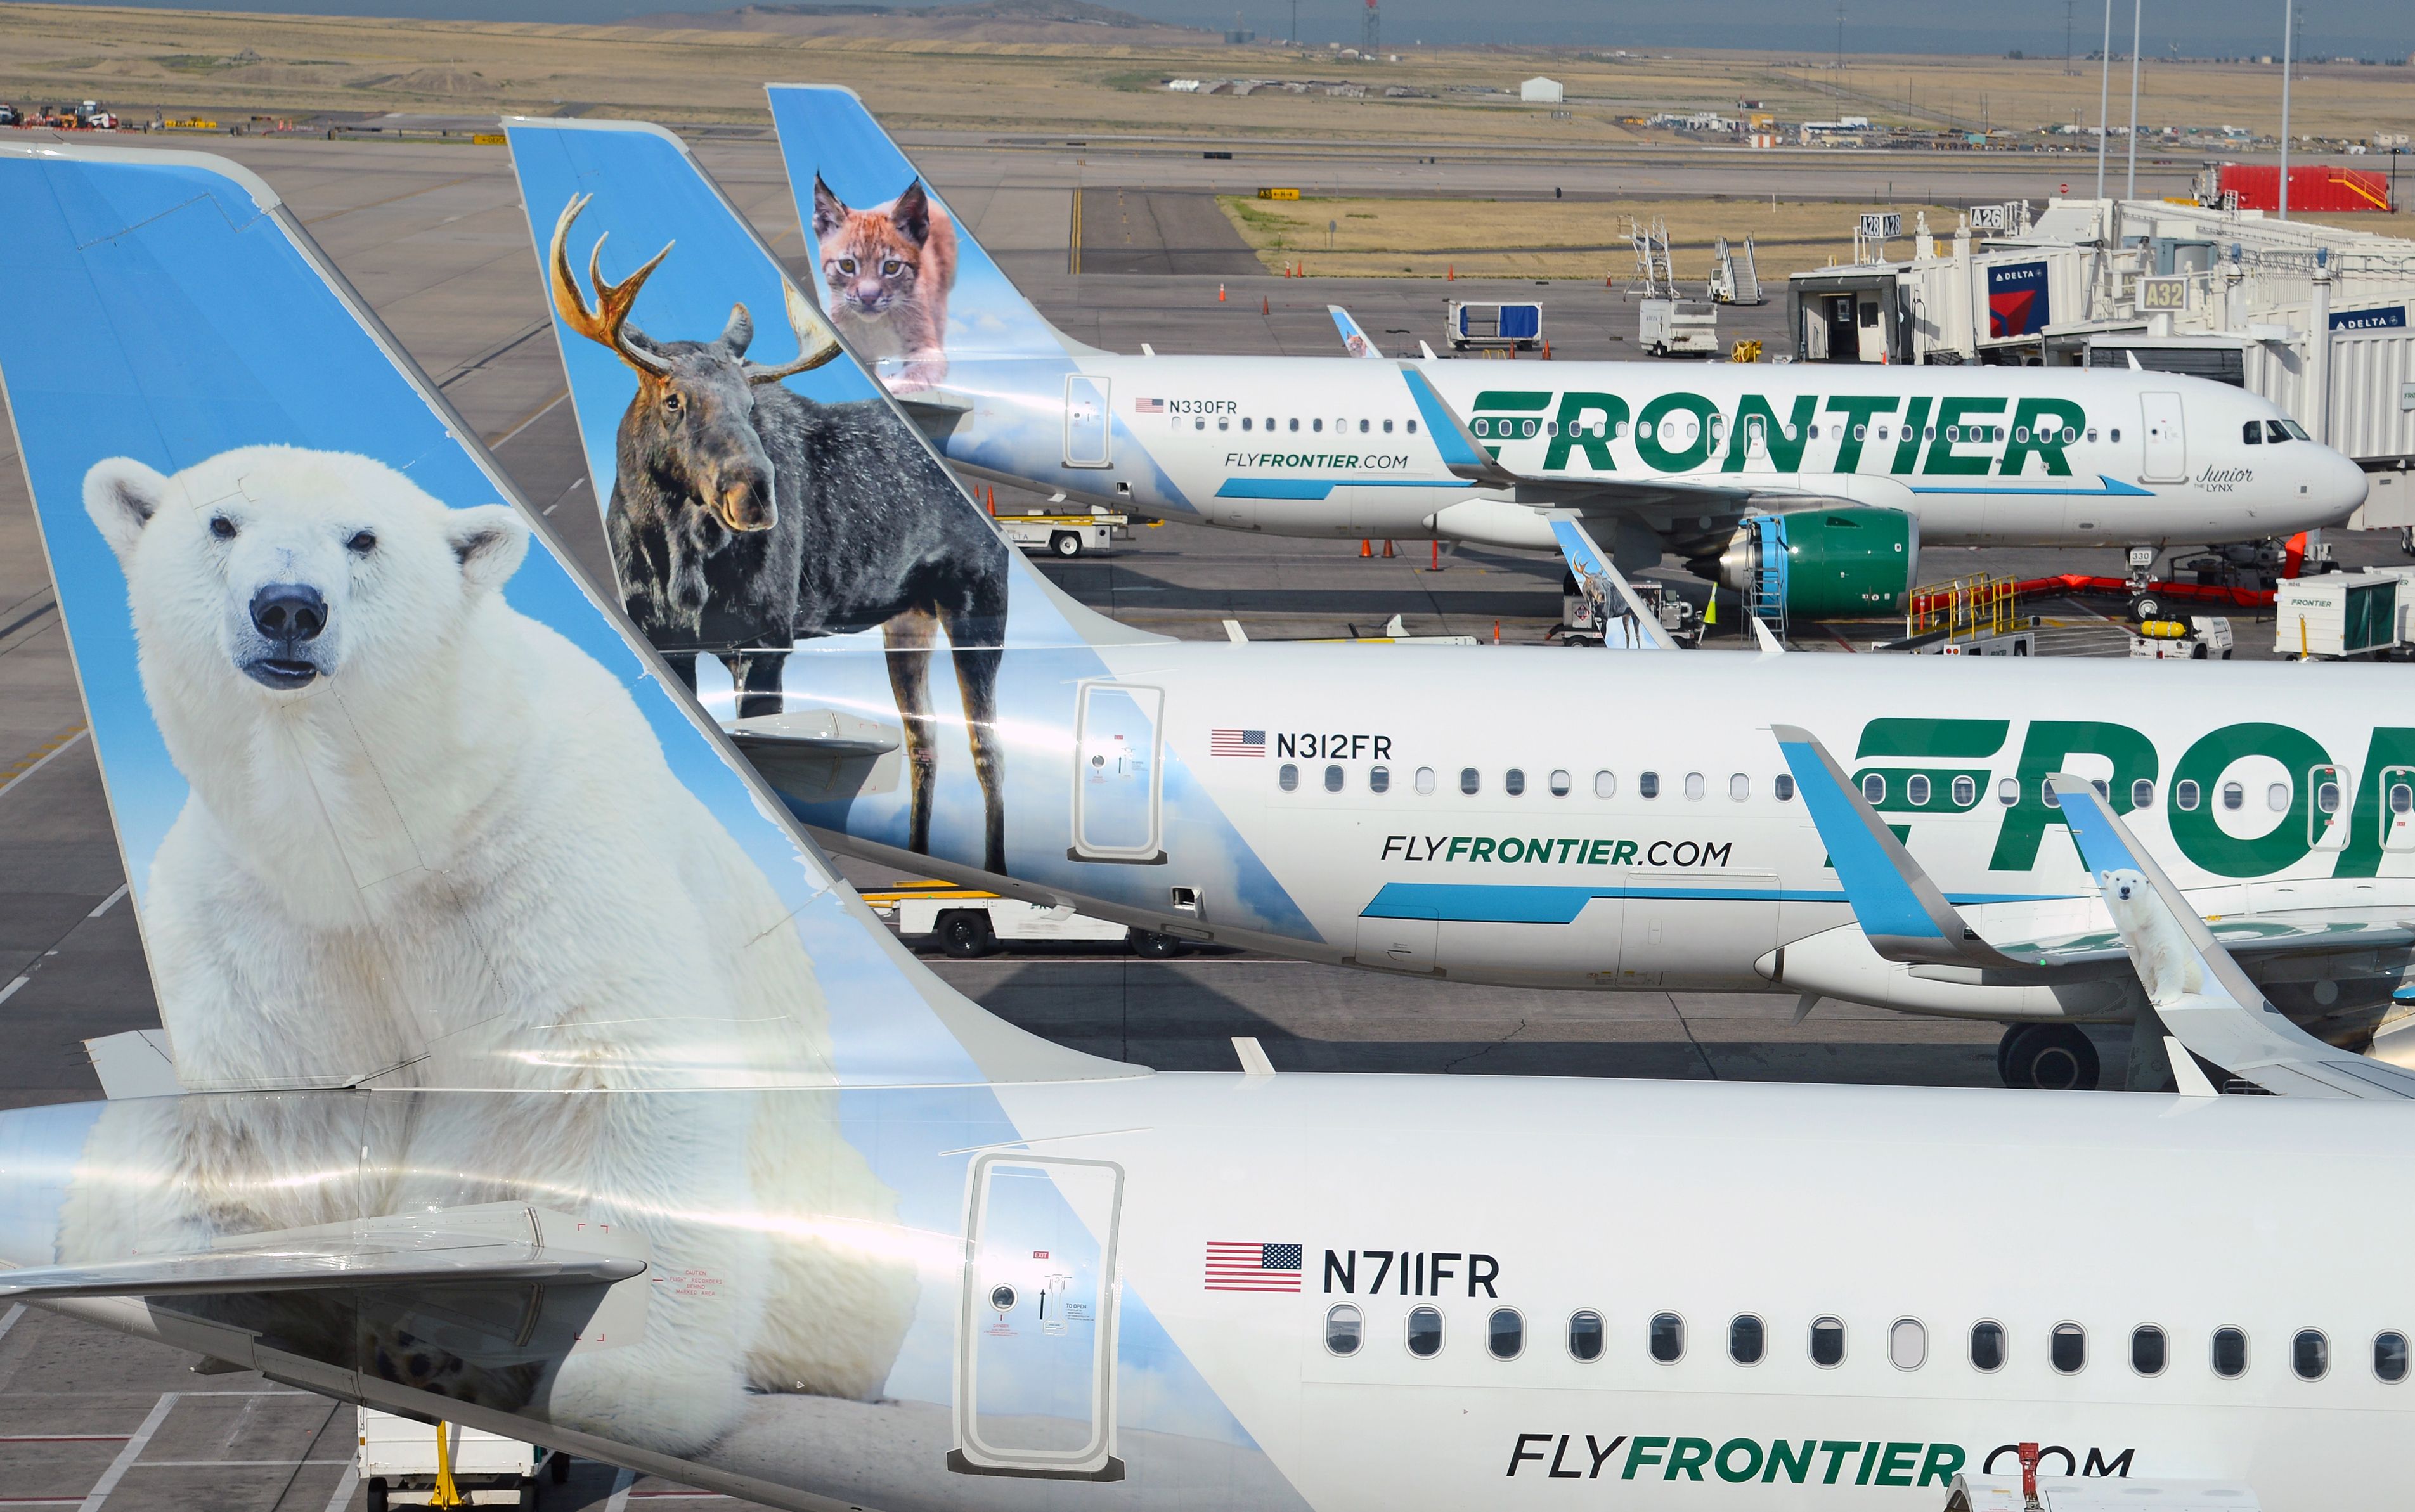 Several Frontier Airlines aircraft parked on an airport apron.